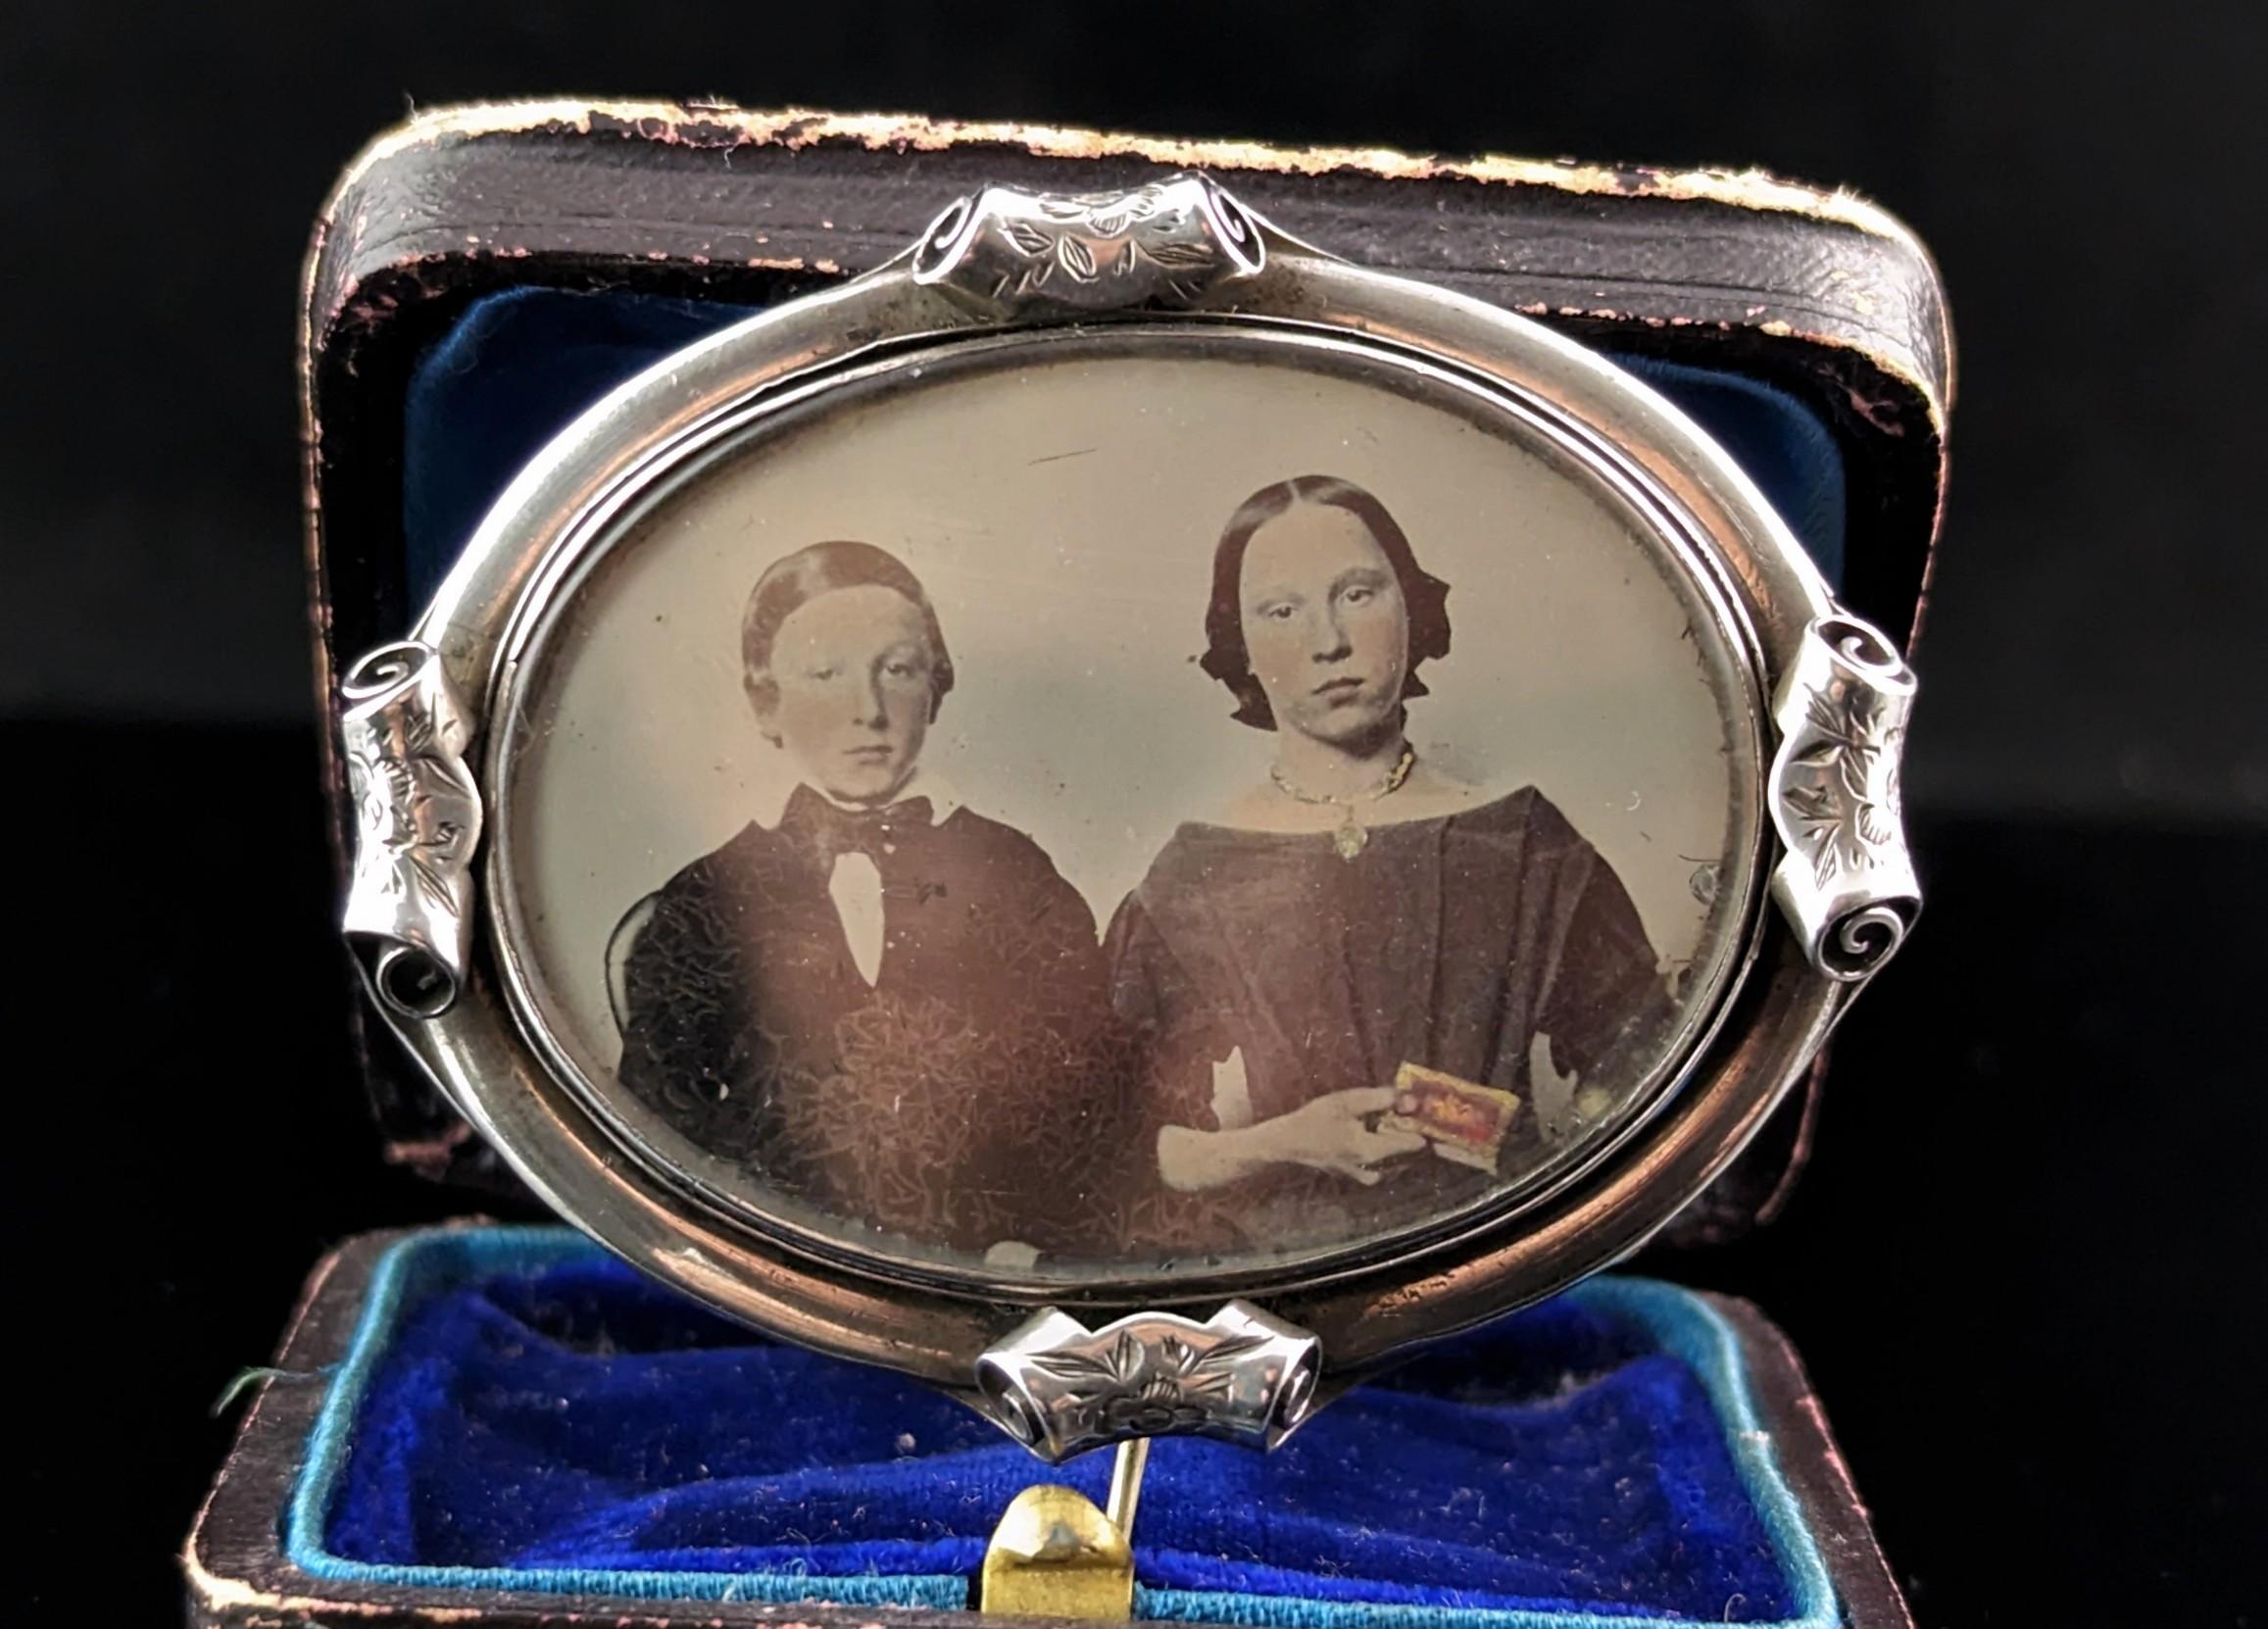 A very unusual Victorian pendant brooch.

It is a Mourning pieve and most likely contained hairwork or a hand painted portrait but now contains a melancholy hand tinted portrait of two children, probably siblings.

It has a sterling silver frame